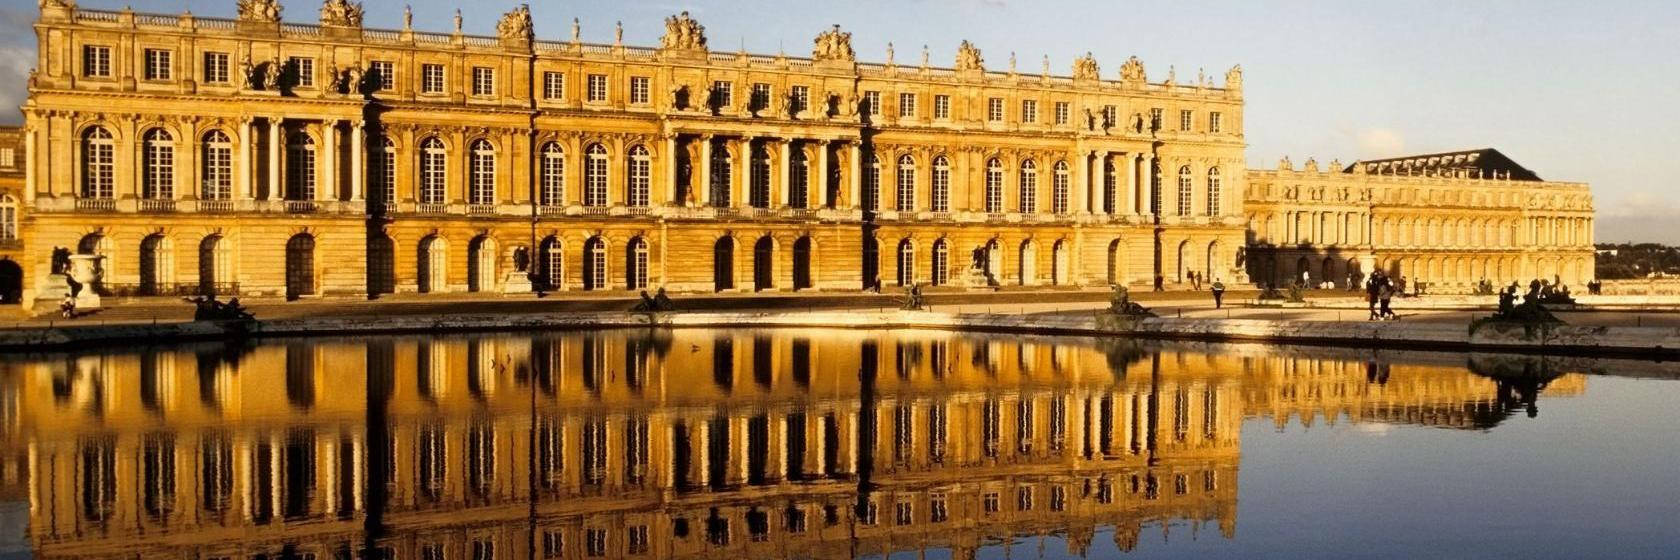 Majestic View Of The Pool Near The Palace Of Versailles